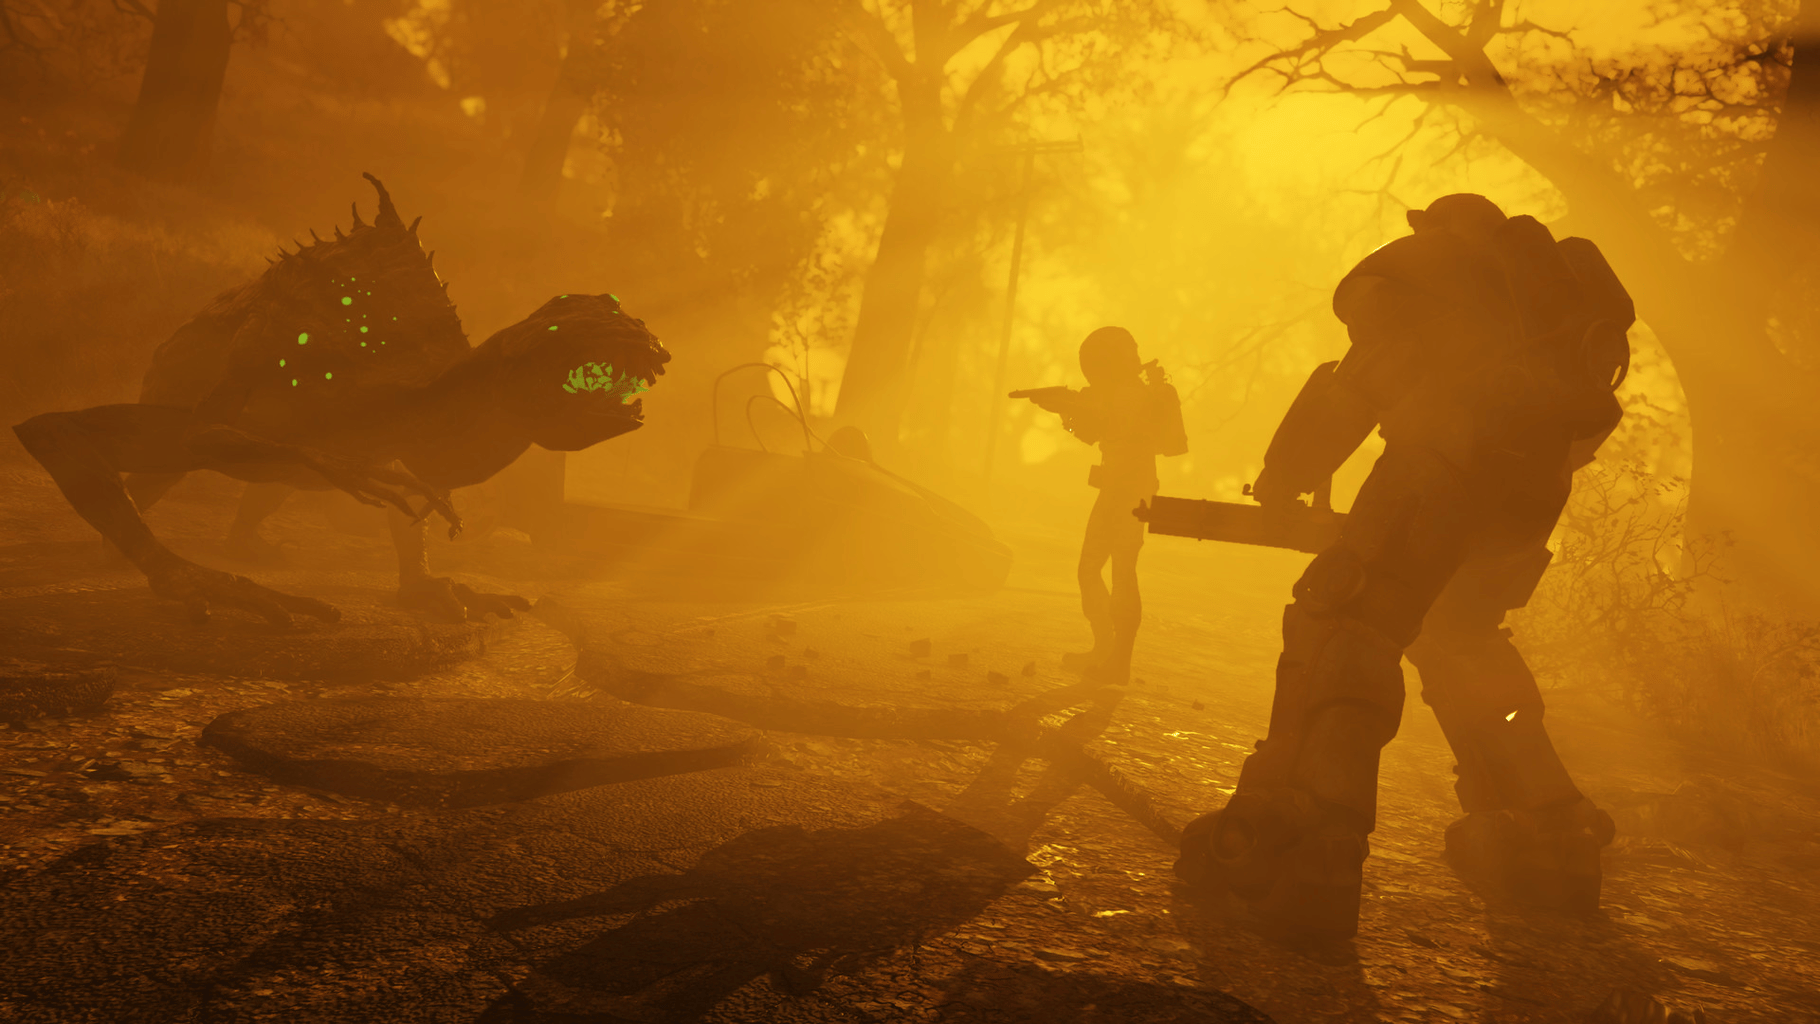 Fallout 76: Wastelanders - Deluxe Edition screenshot